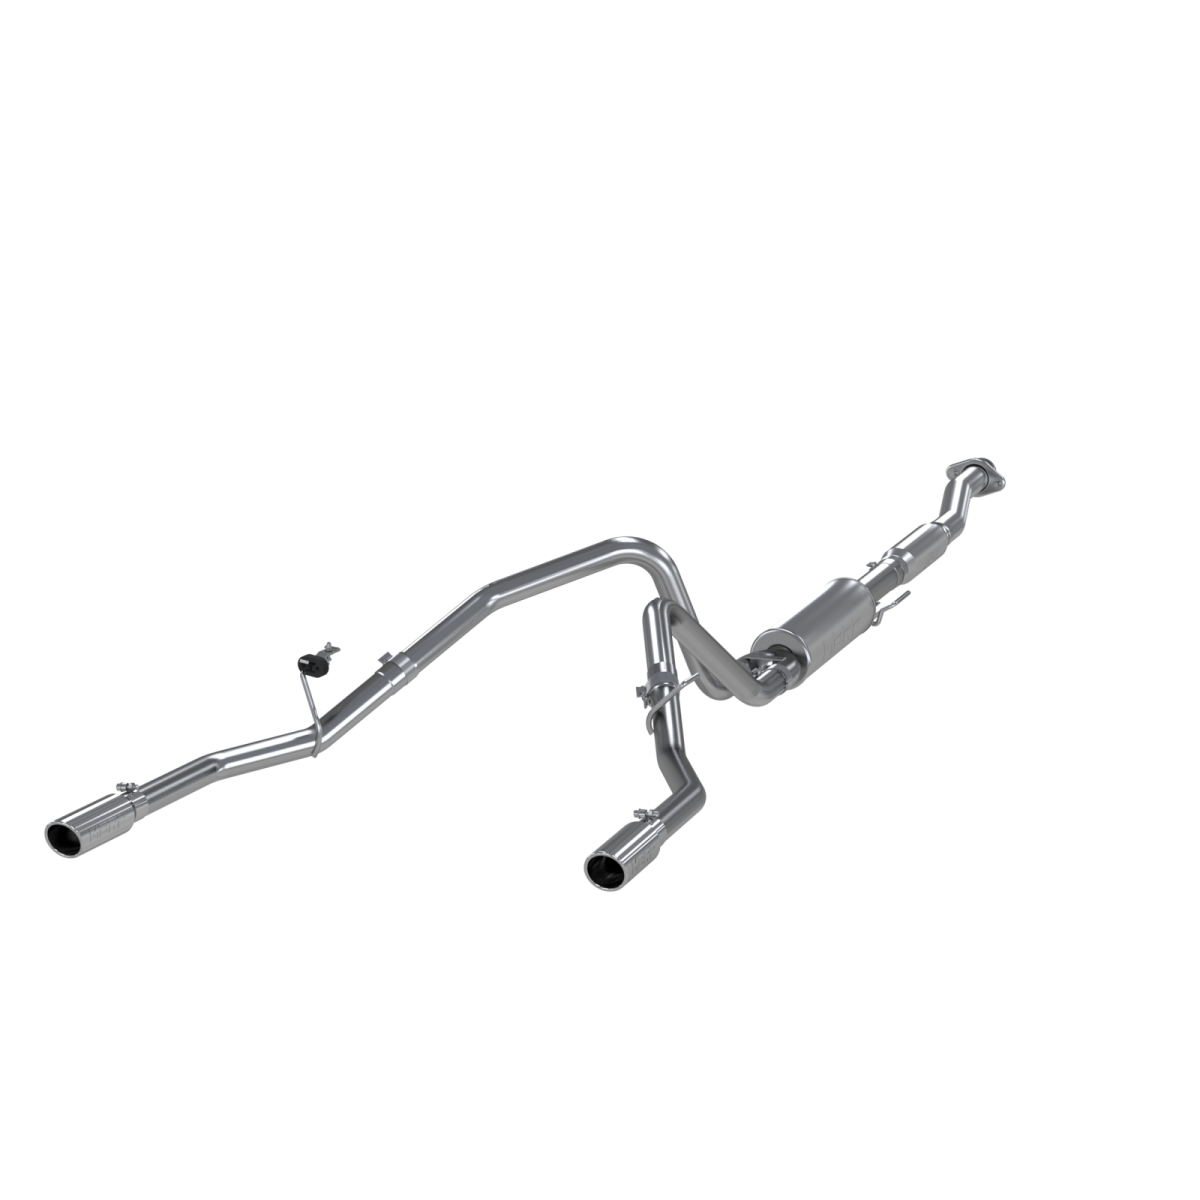 MBRP - MBRP Installer Series Ford 3.5 Inch Down Pipe Kit For 11-14 Ford F-150 5.0L Regular Cab/Long Bed S5234AL